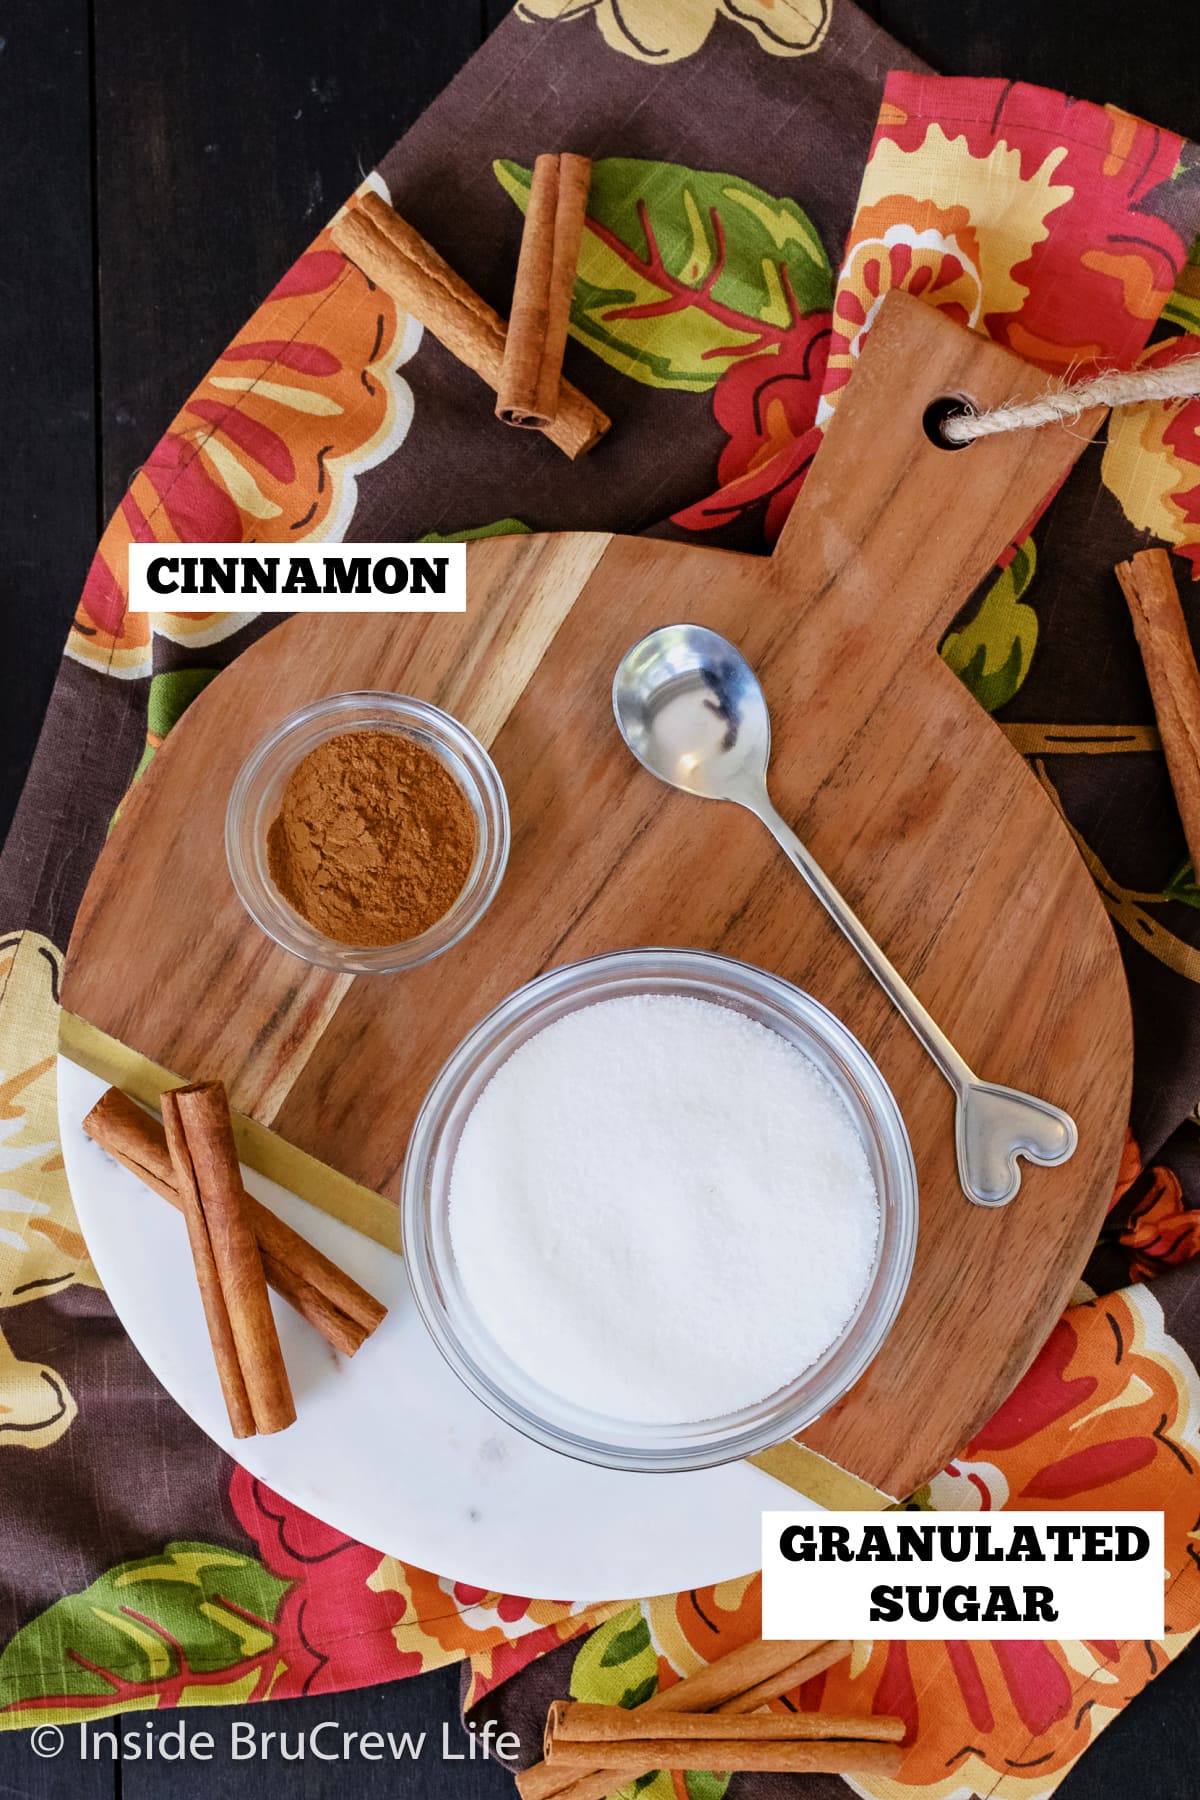 A round board with bowls of cinnamon and sugar in them.